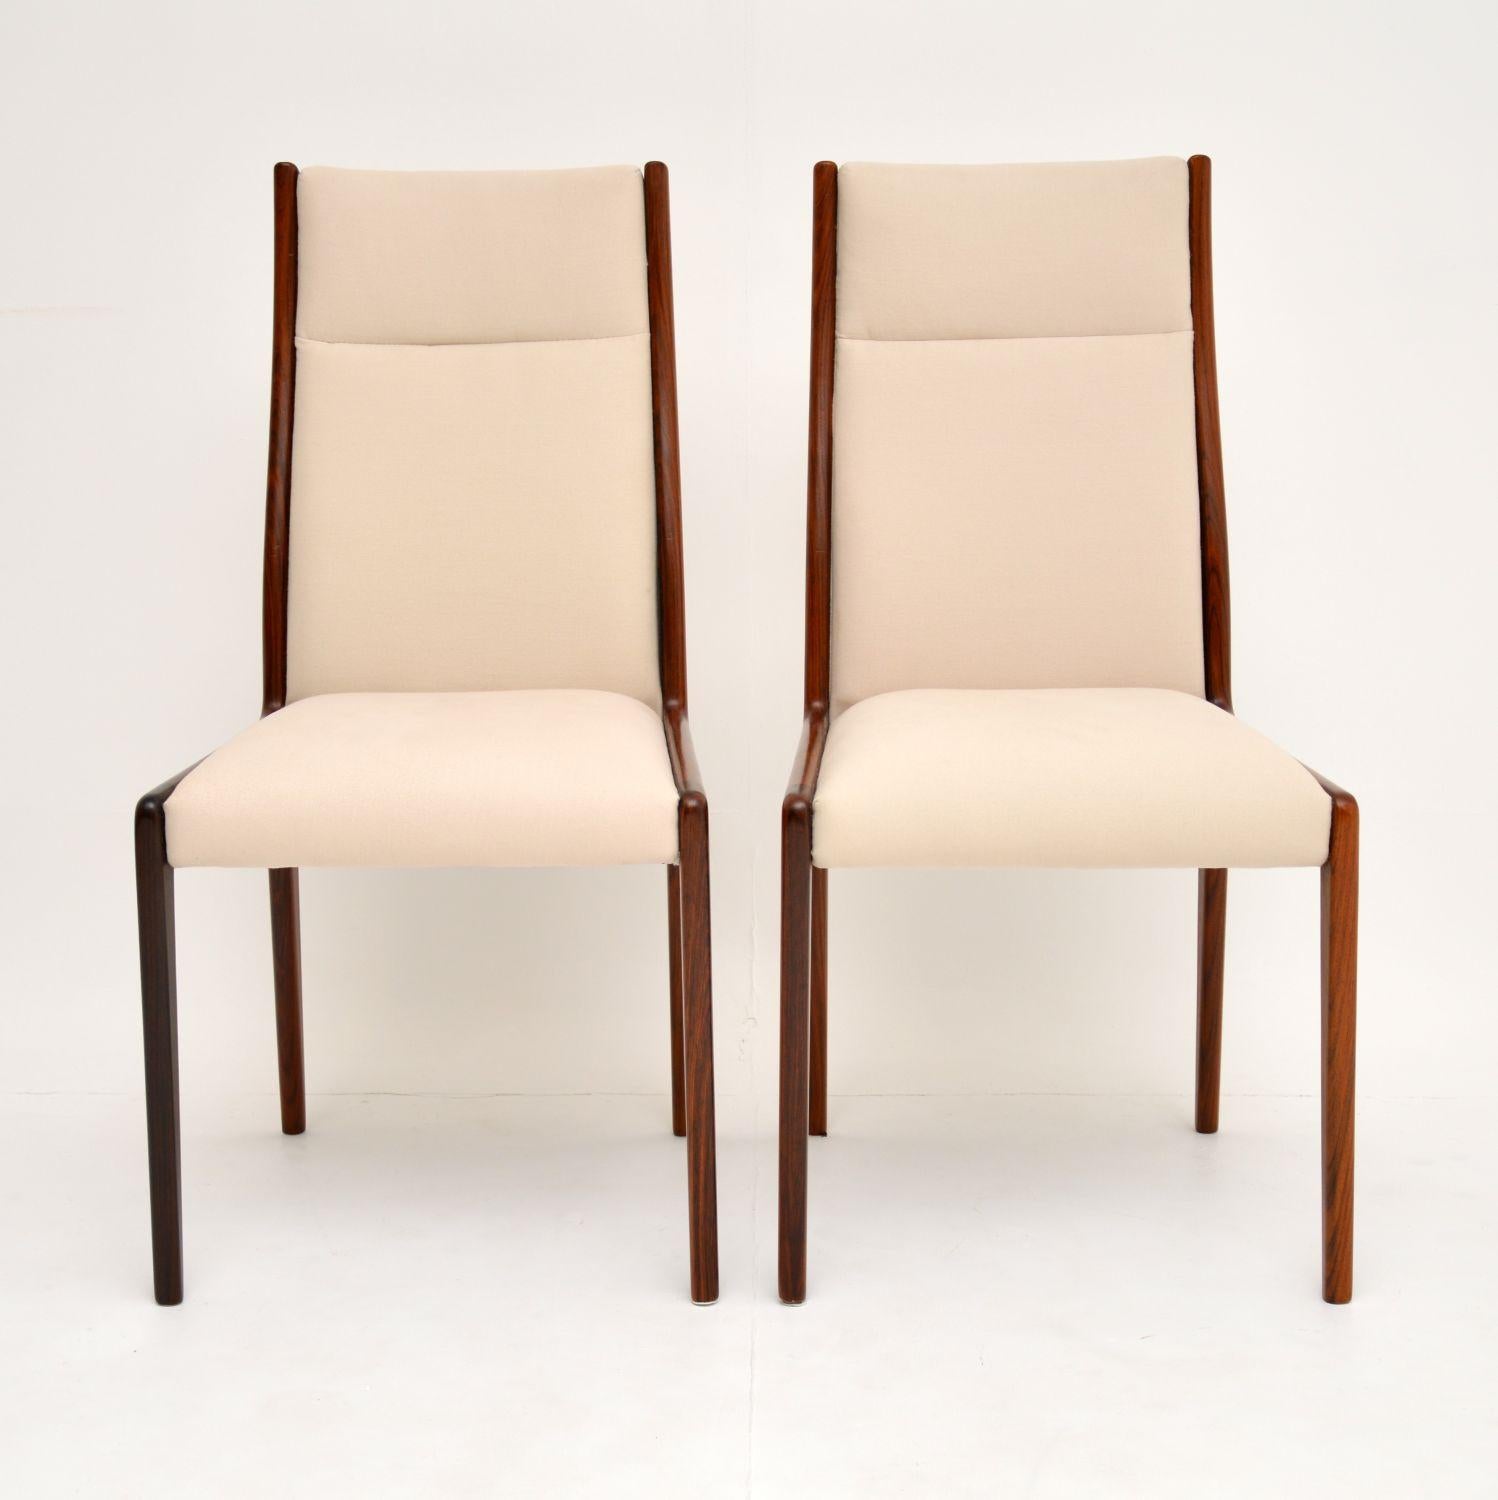 A beautifully designed pair of vintage Danish chairs in solid wood. These date from the 1960s, they are super quality.

We have had these fully restored, the frames have been stripped and re-polished to a very high standard. The colour and grain